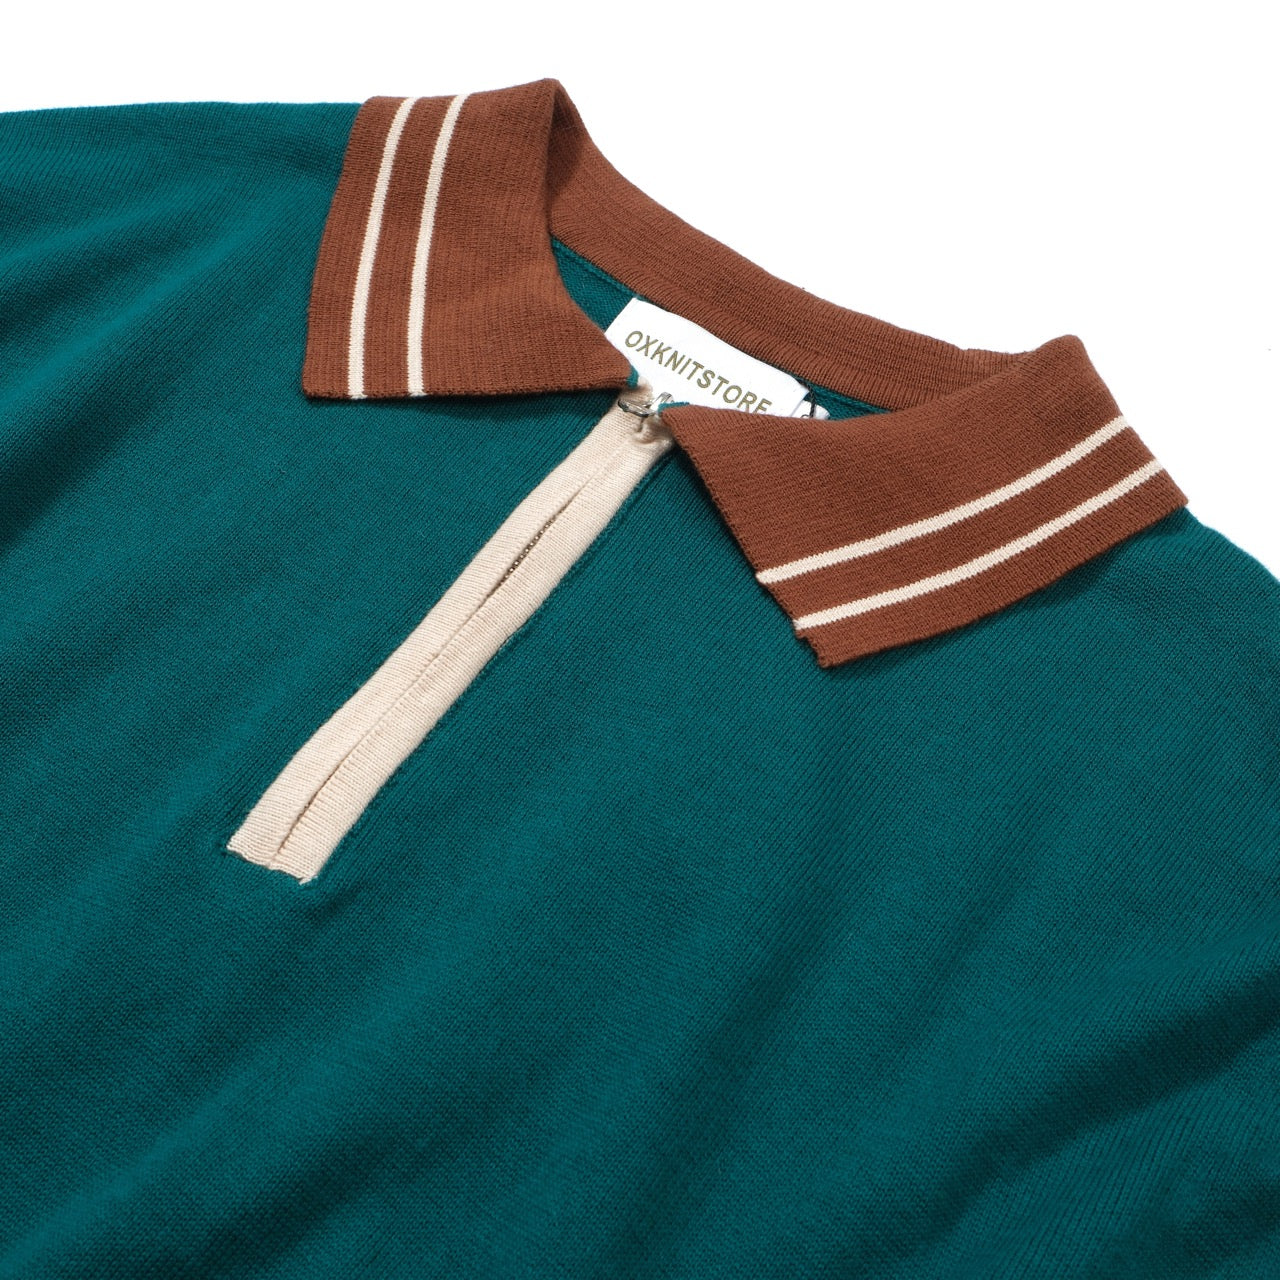 OXKNIT Men Vintage Clothing 1960s Mod Style Casual Style Green Knit Retro Polo